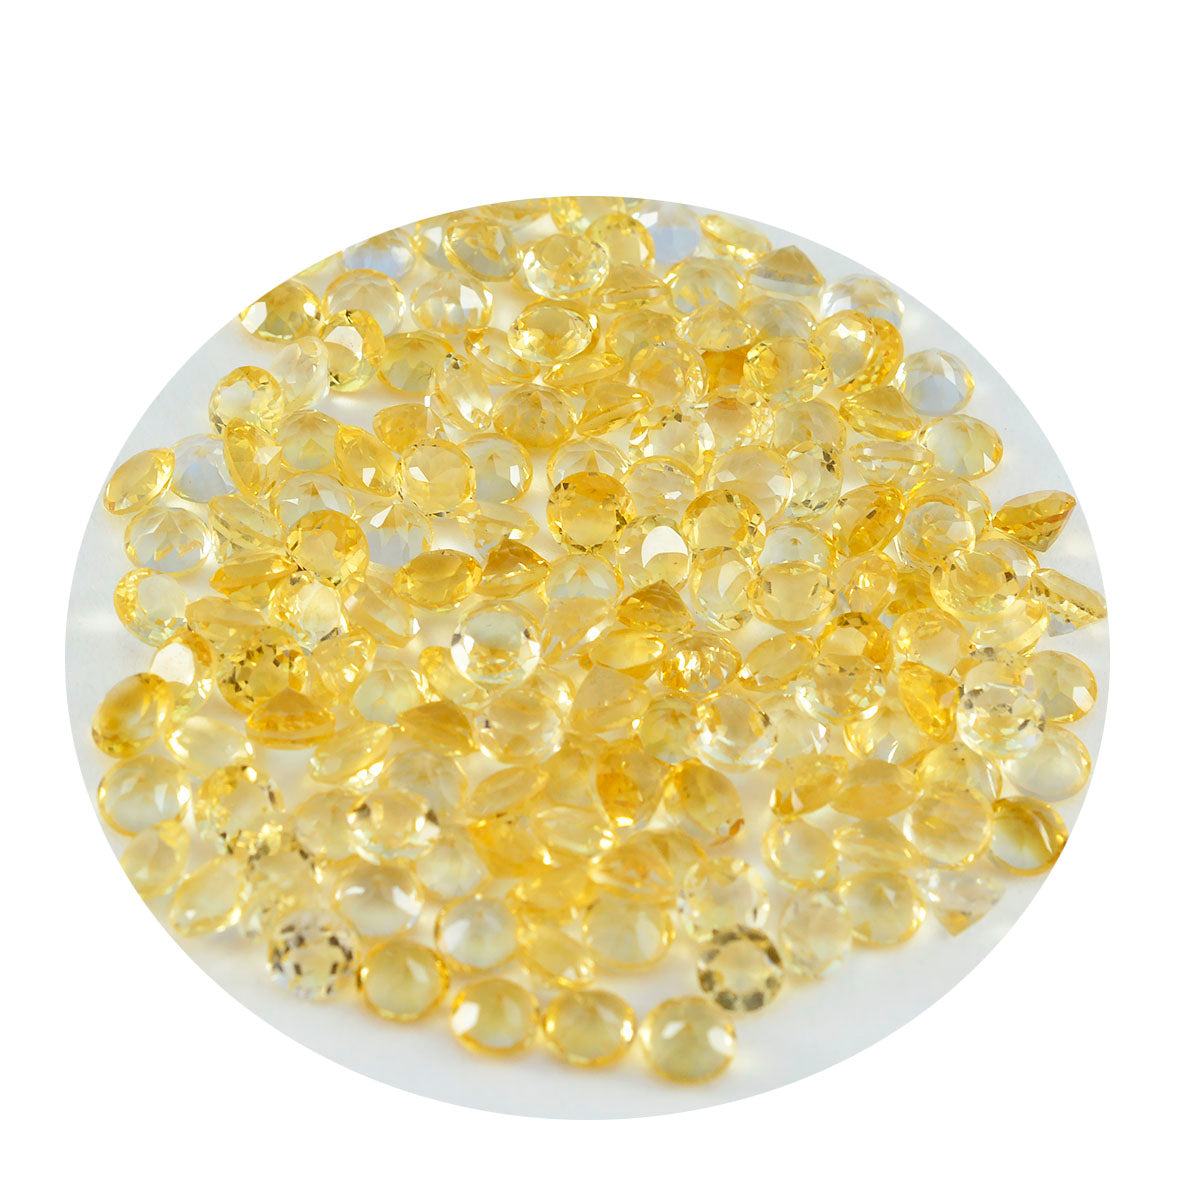 Riyogems 1PC Genuine Yellow Citrine Faceted 3x3 mm Round Shape awesome Quality Loose Stone